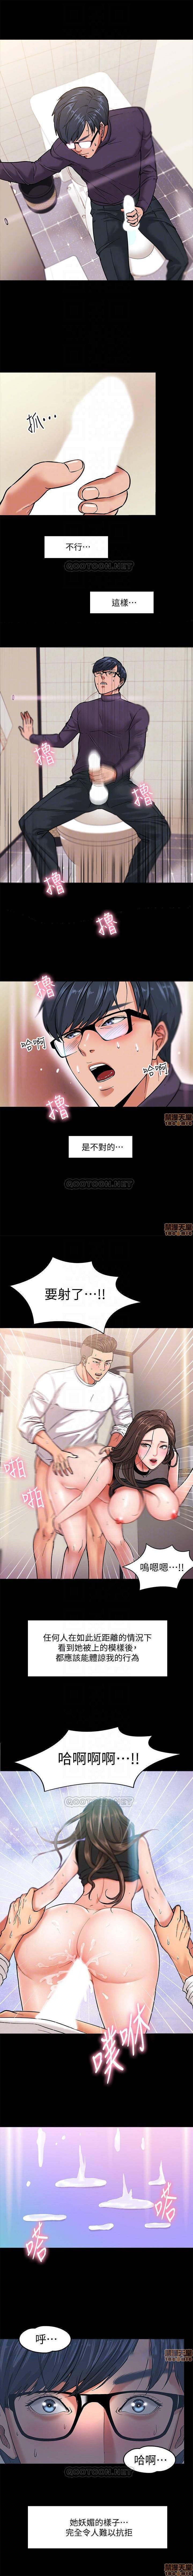 PROFESSOR, ARE YOU JUST GOING TO LOOK AT ME? | DESIRE SWAMP | 教授，你還等什麼? Ch. 2 [Chinese] Manhwa 2